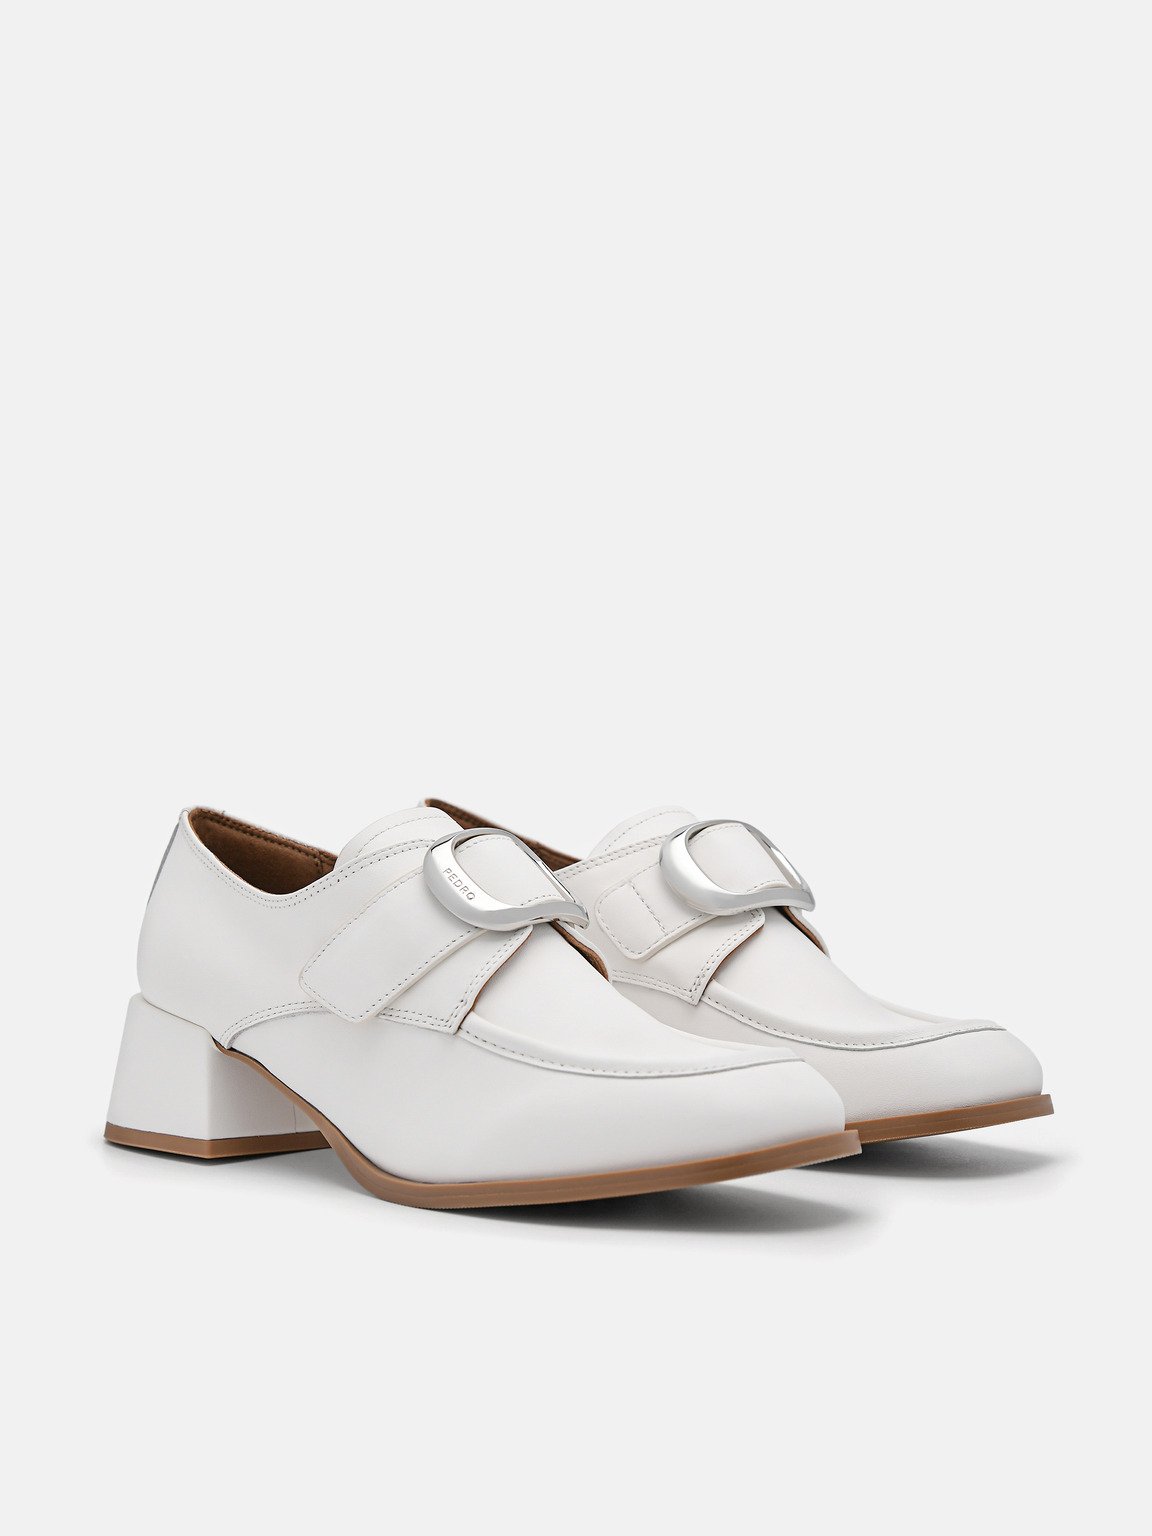 Eden Leather Heel Loafers, White